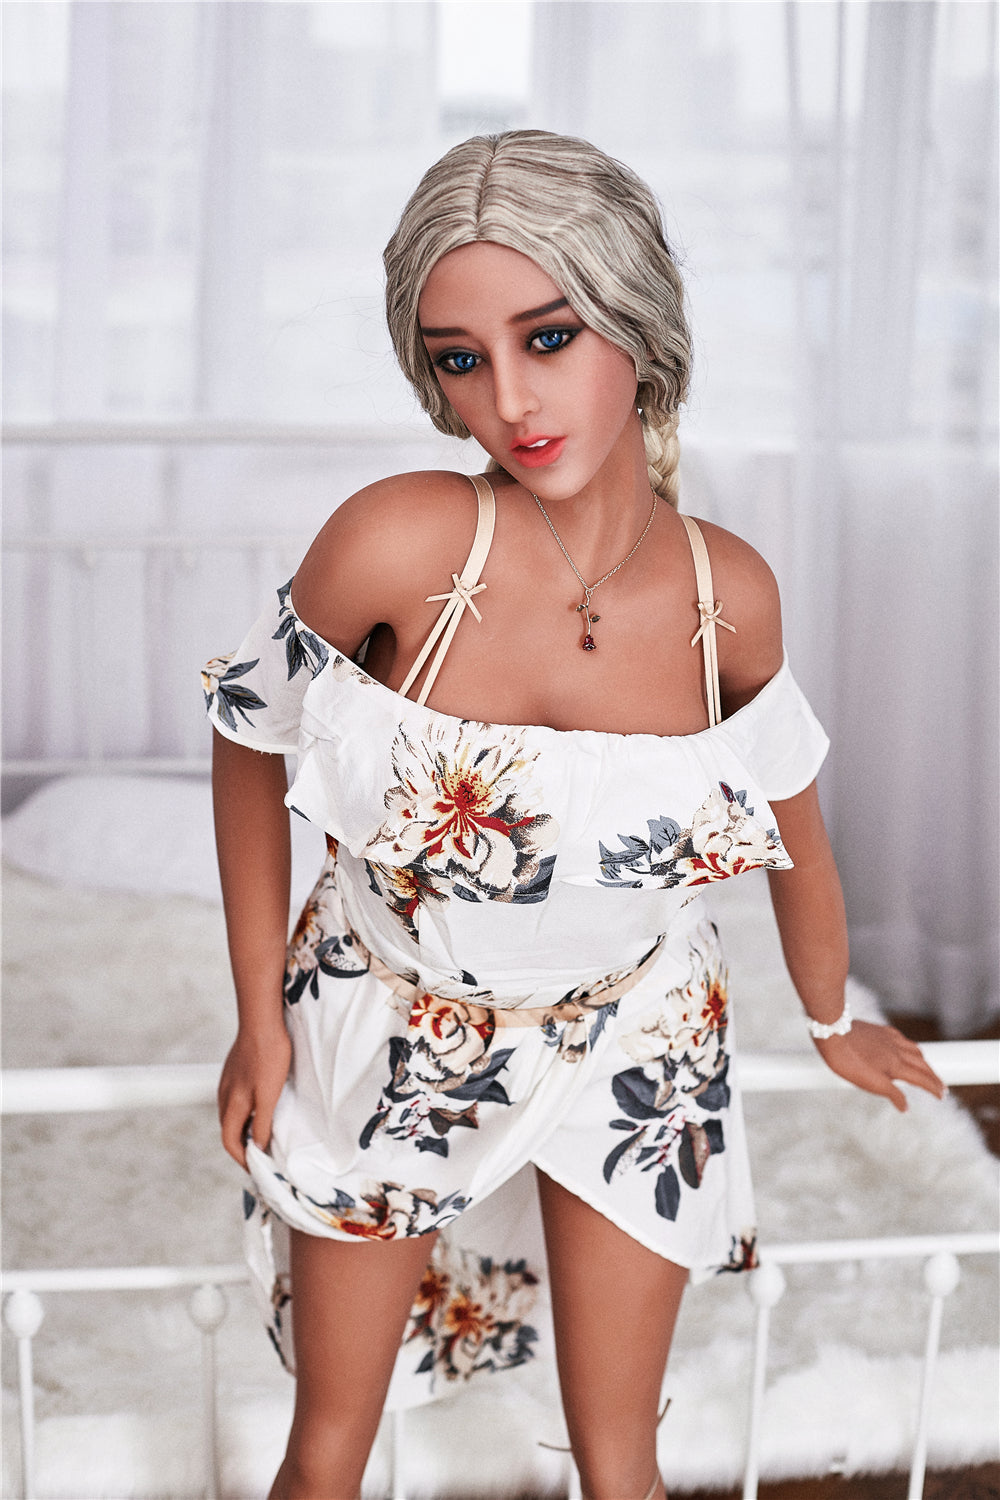 Irontech - Real Sex Doll - 5ft 7in (169cm) - Lily - Love Dolls 4U